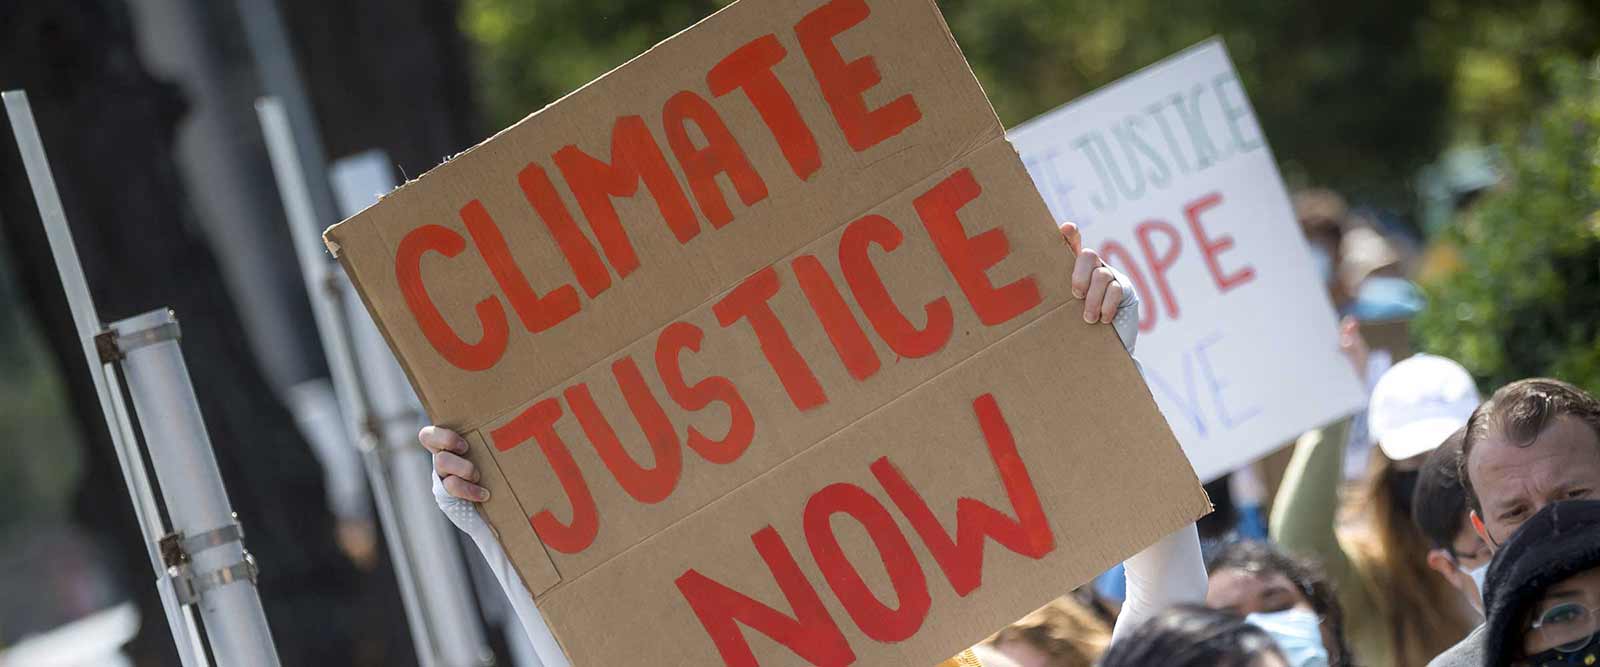 Photo of protester at UC San Diego climate march with climate justice sign.